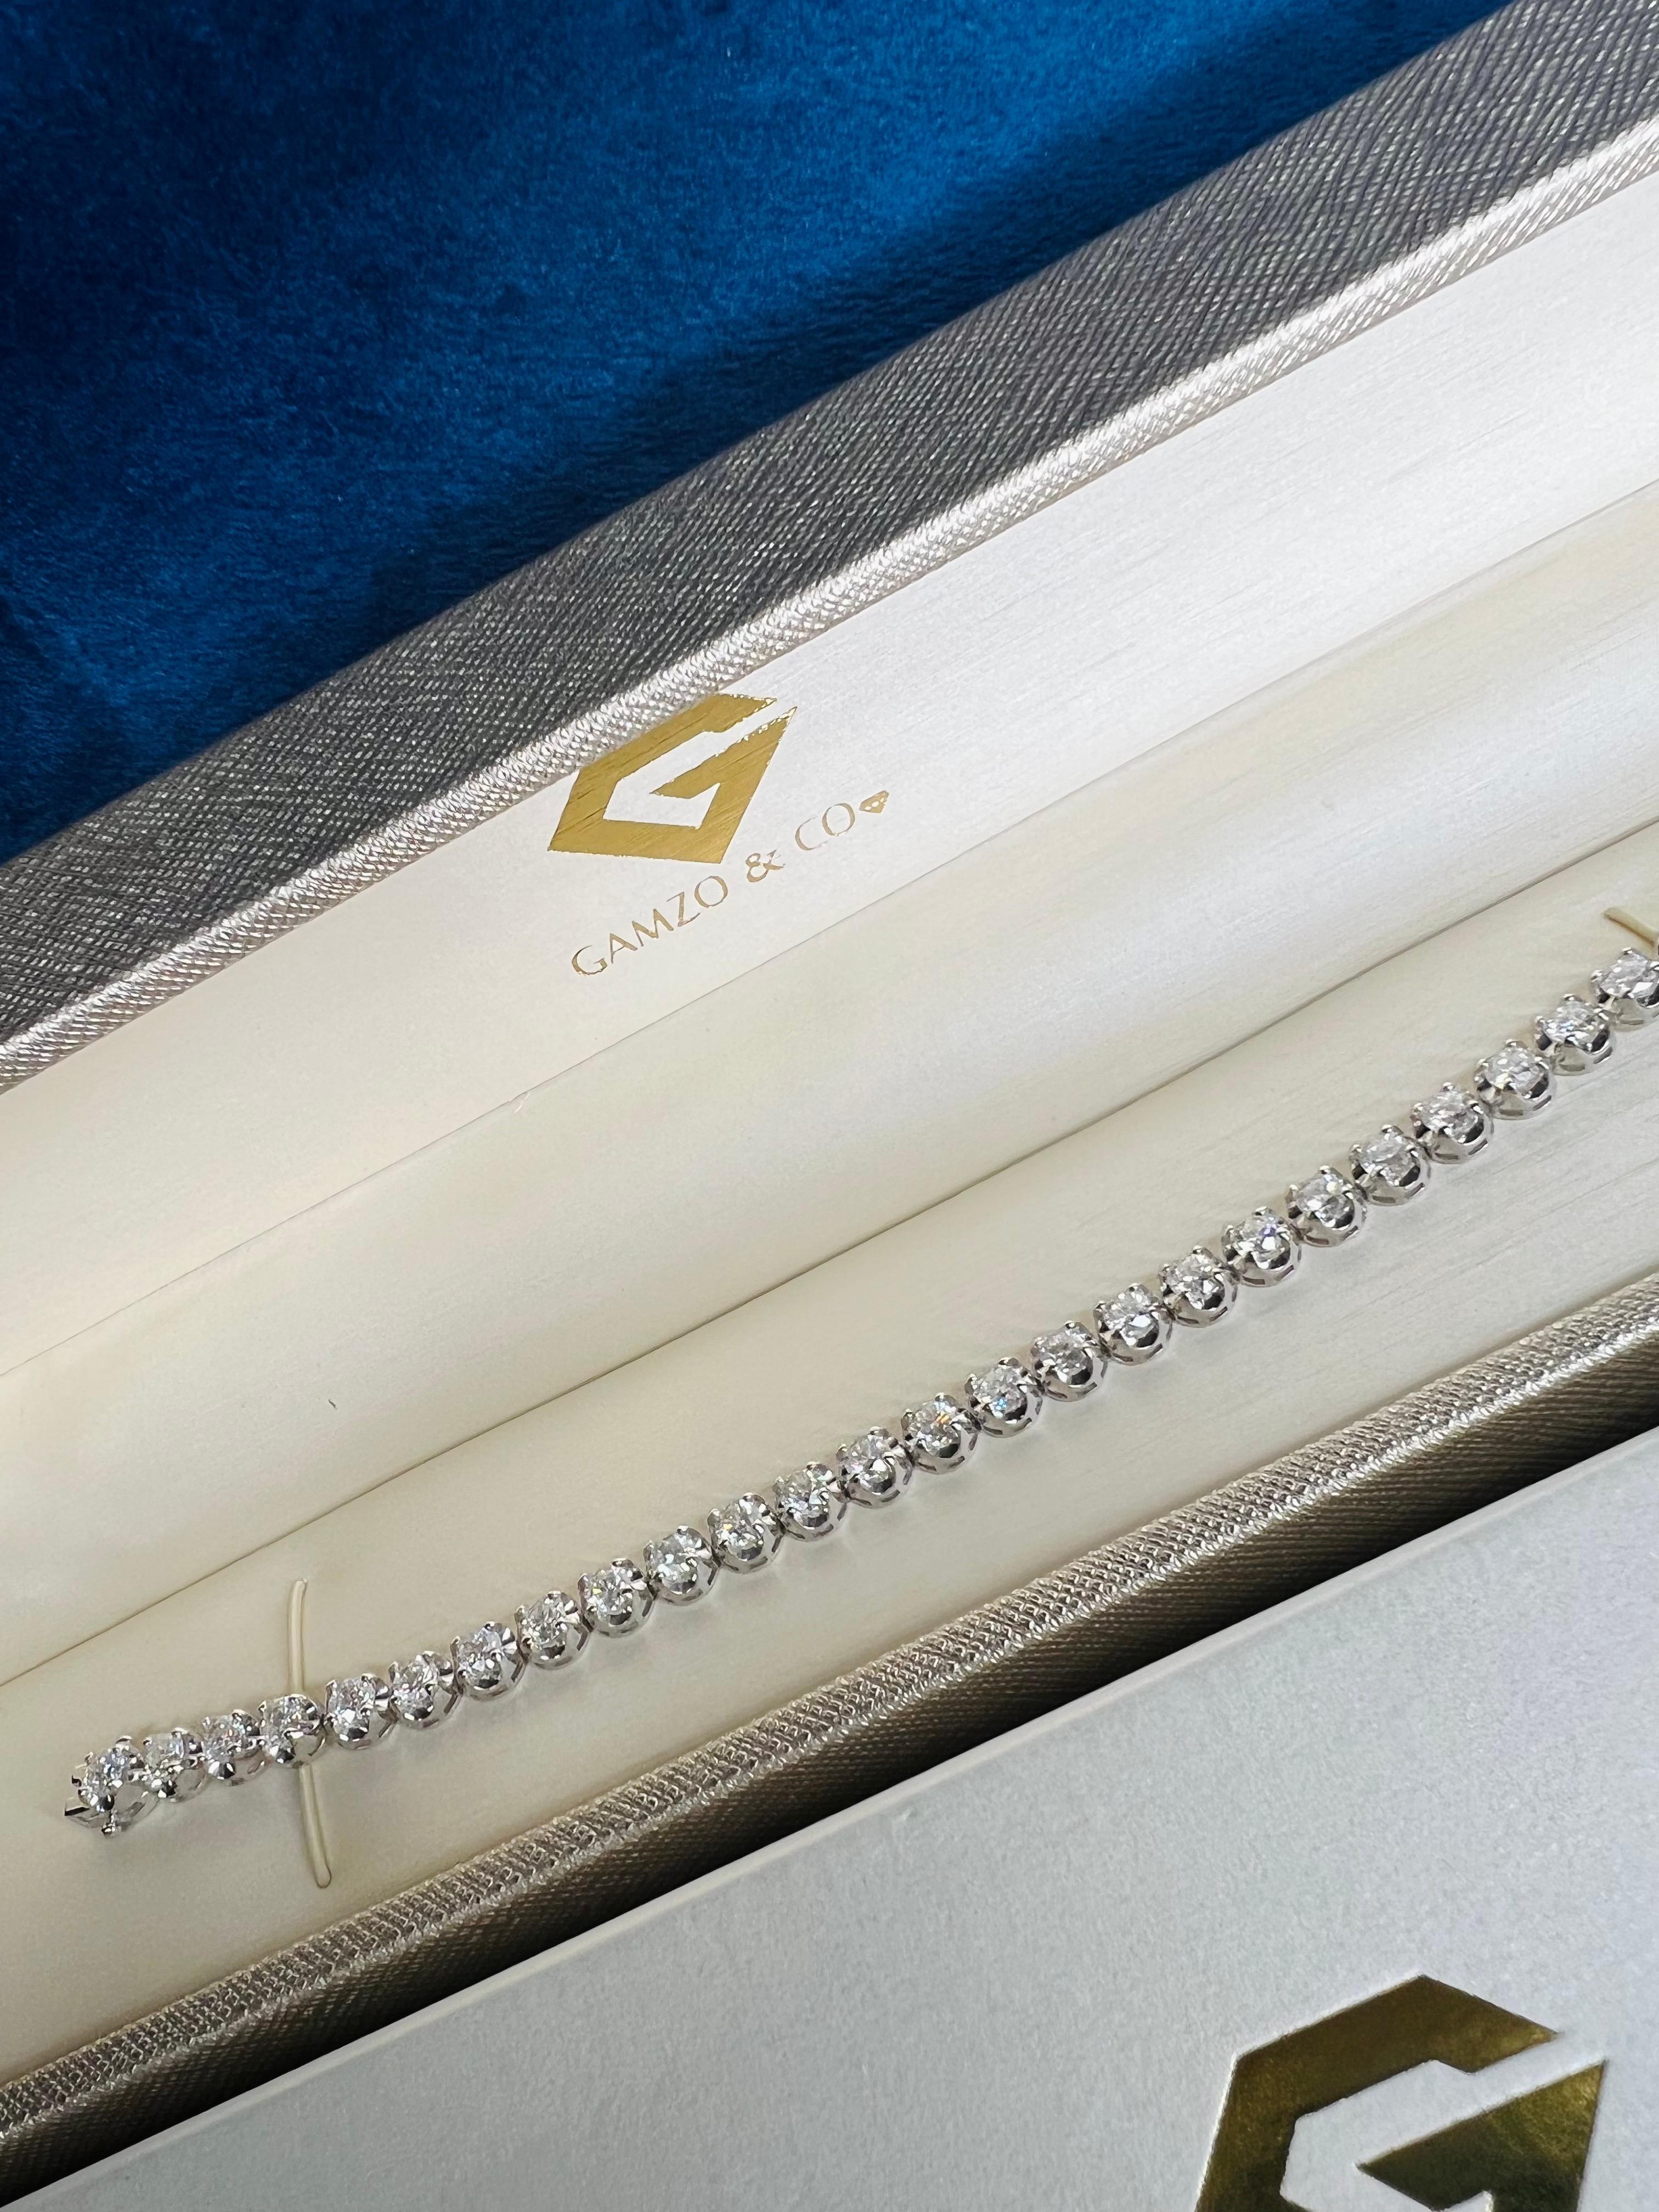 These beautiful round diamonds dance around your wrist as they absorb light and attention.
Metal: 14k Gold
Diamond Cut: Round
Diamond Total Carats: 7ct
Diamond Clarity: VS
Diamond Color: F
Color: White Gold
Bracelet Length: 8.5 Inches 
Included with